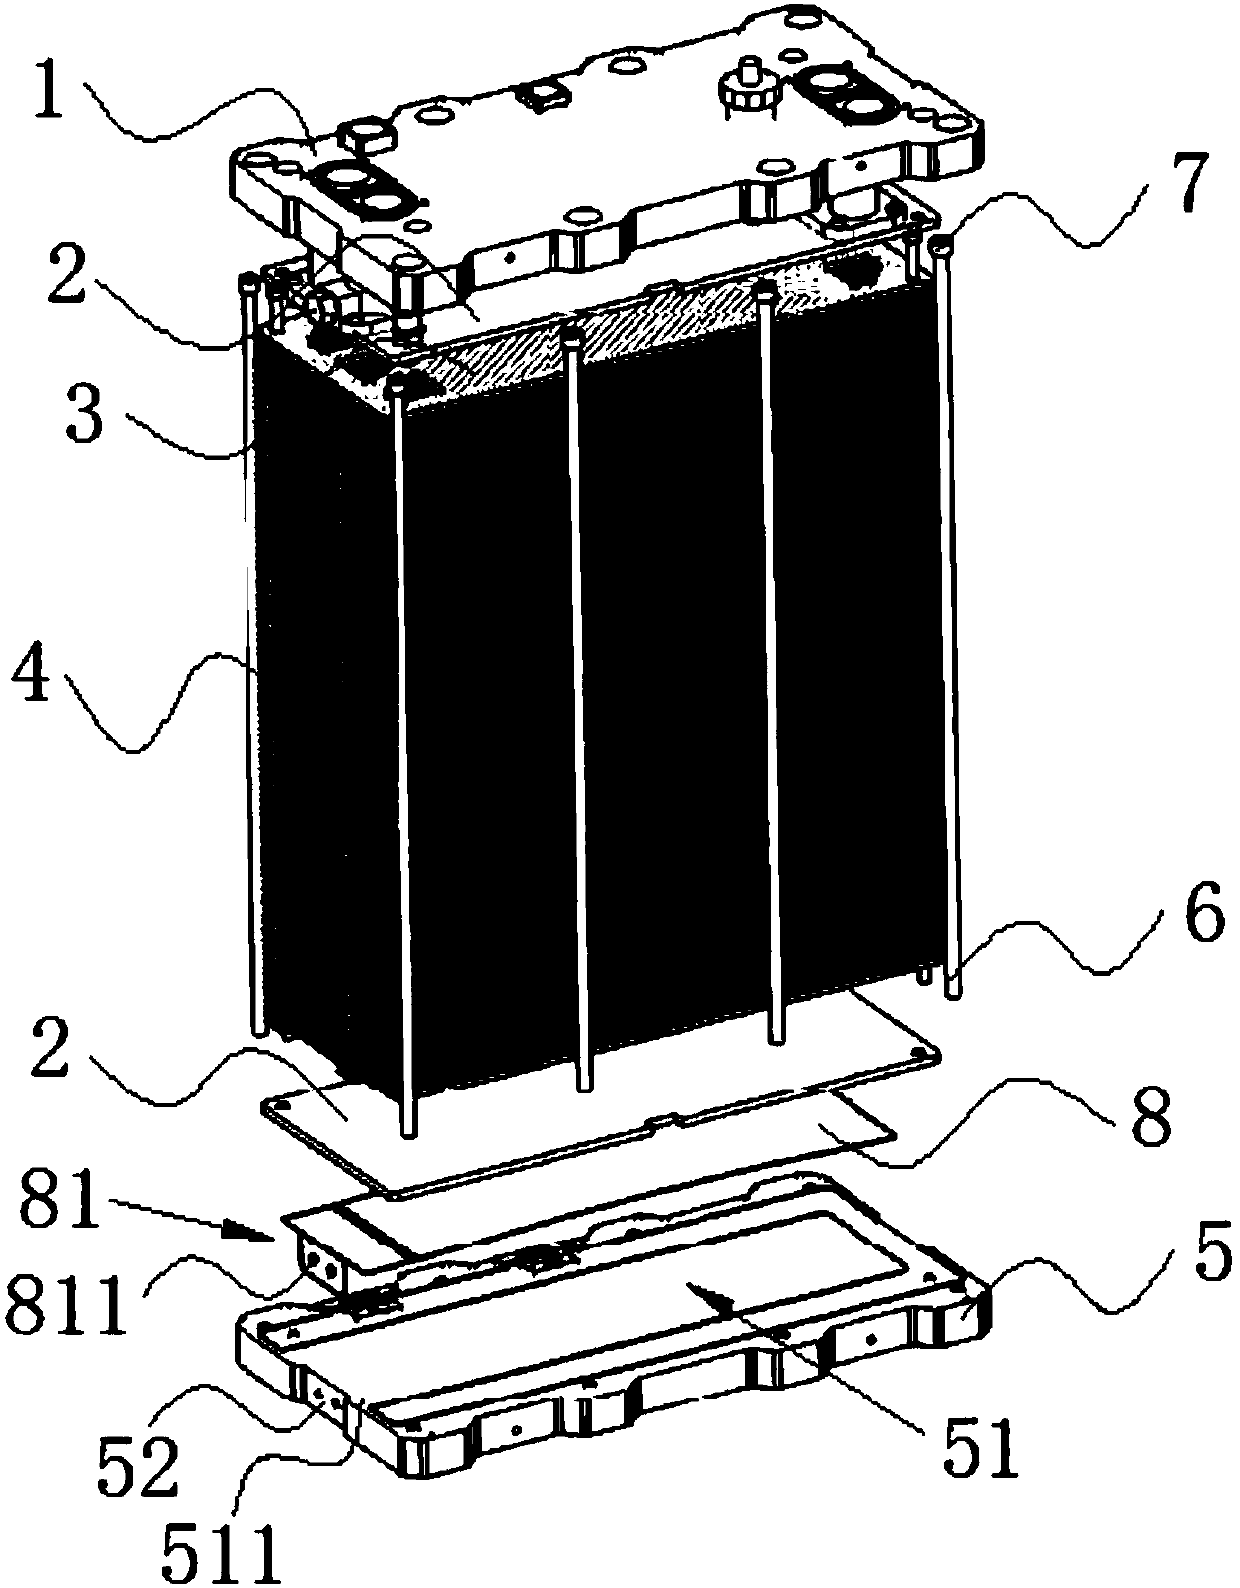 Packaging structure of fuel cell stack